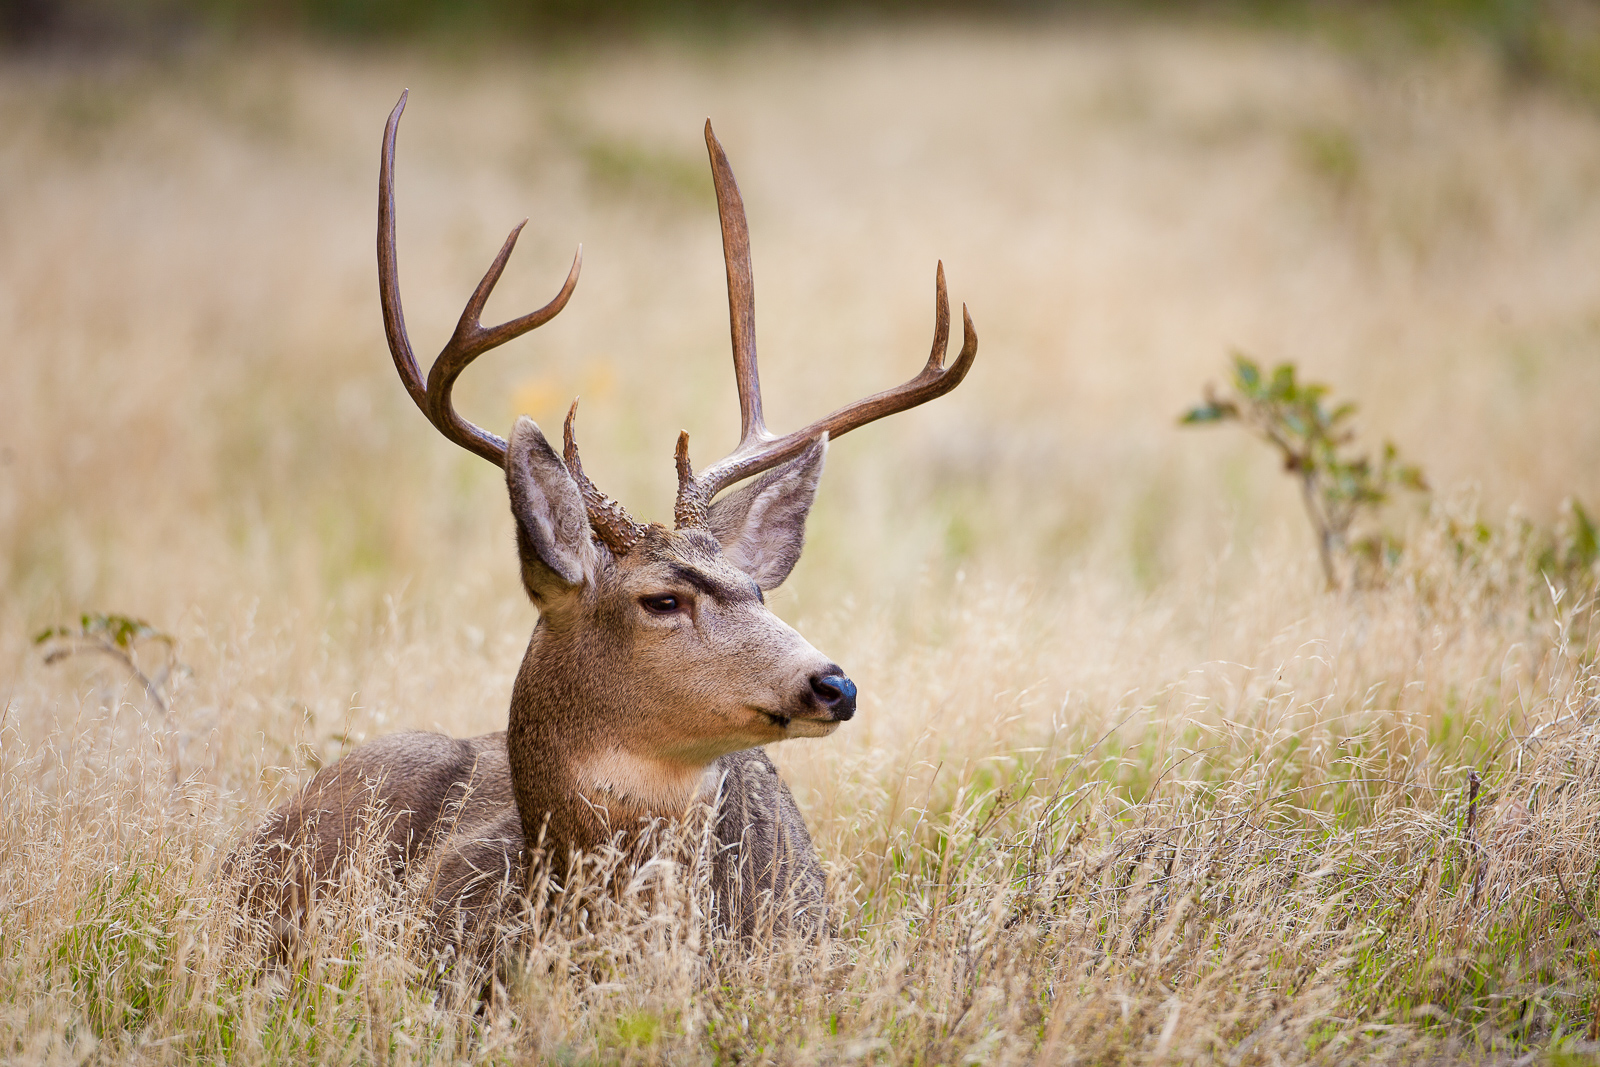 Bull deer sits comfortably in the meadow grass of the canyon lands within Zion National Park.   Fresh water nearby offers a life...